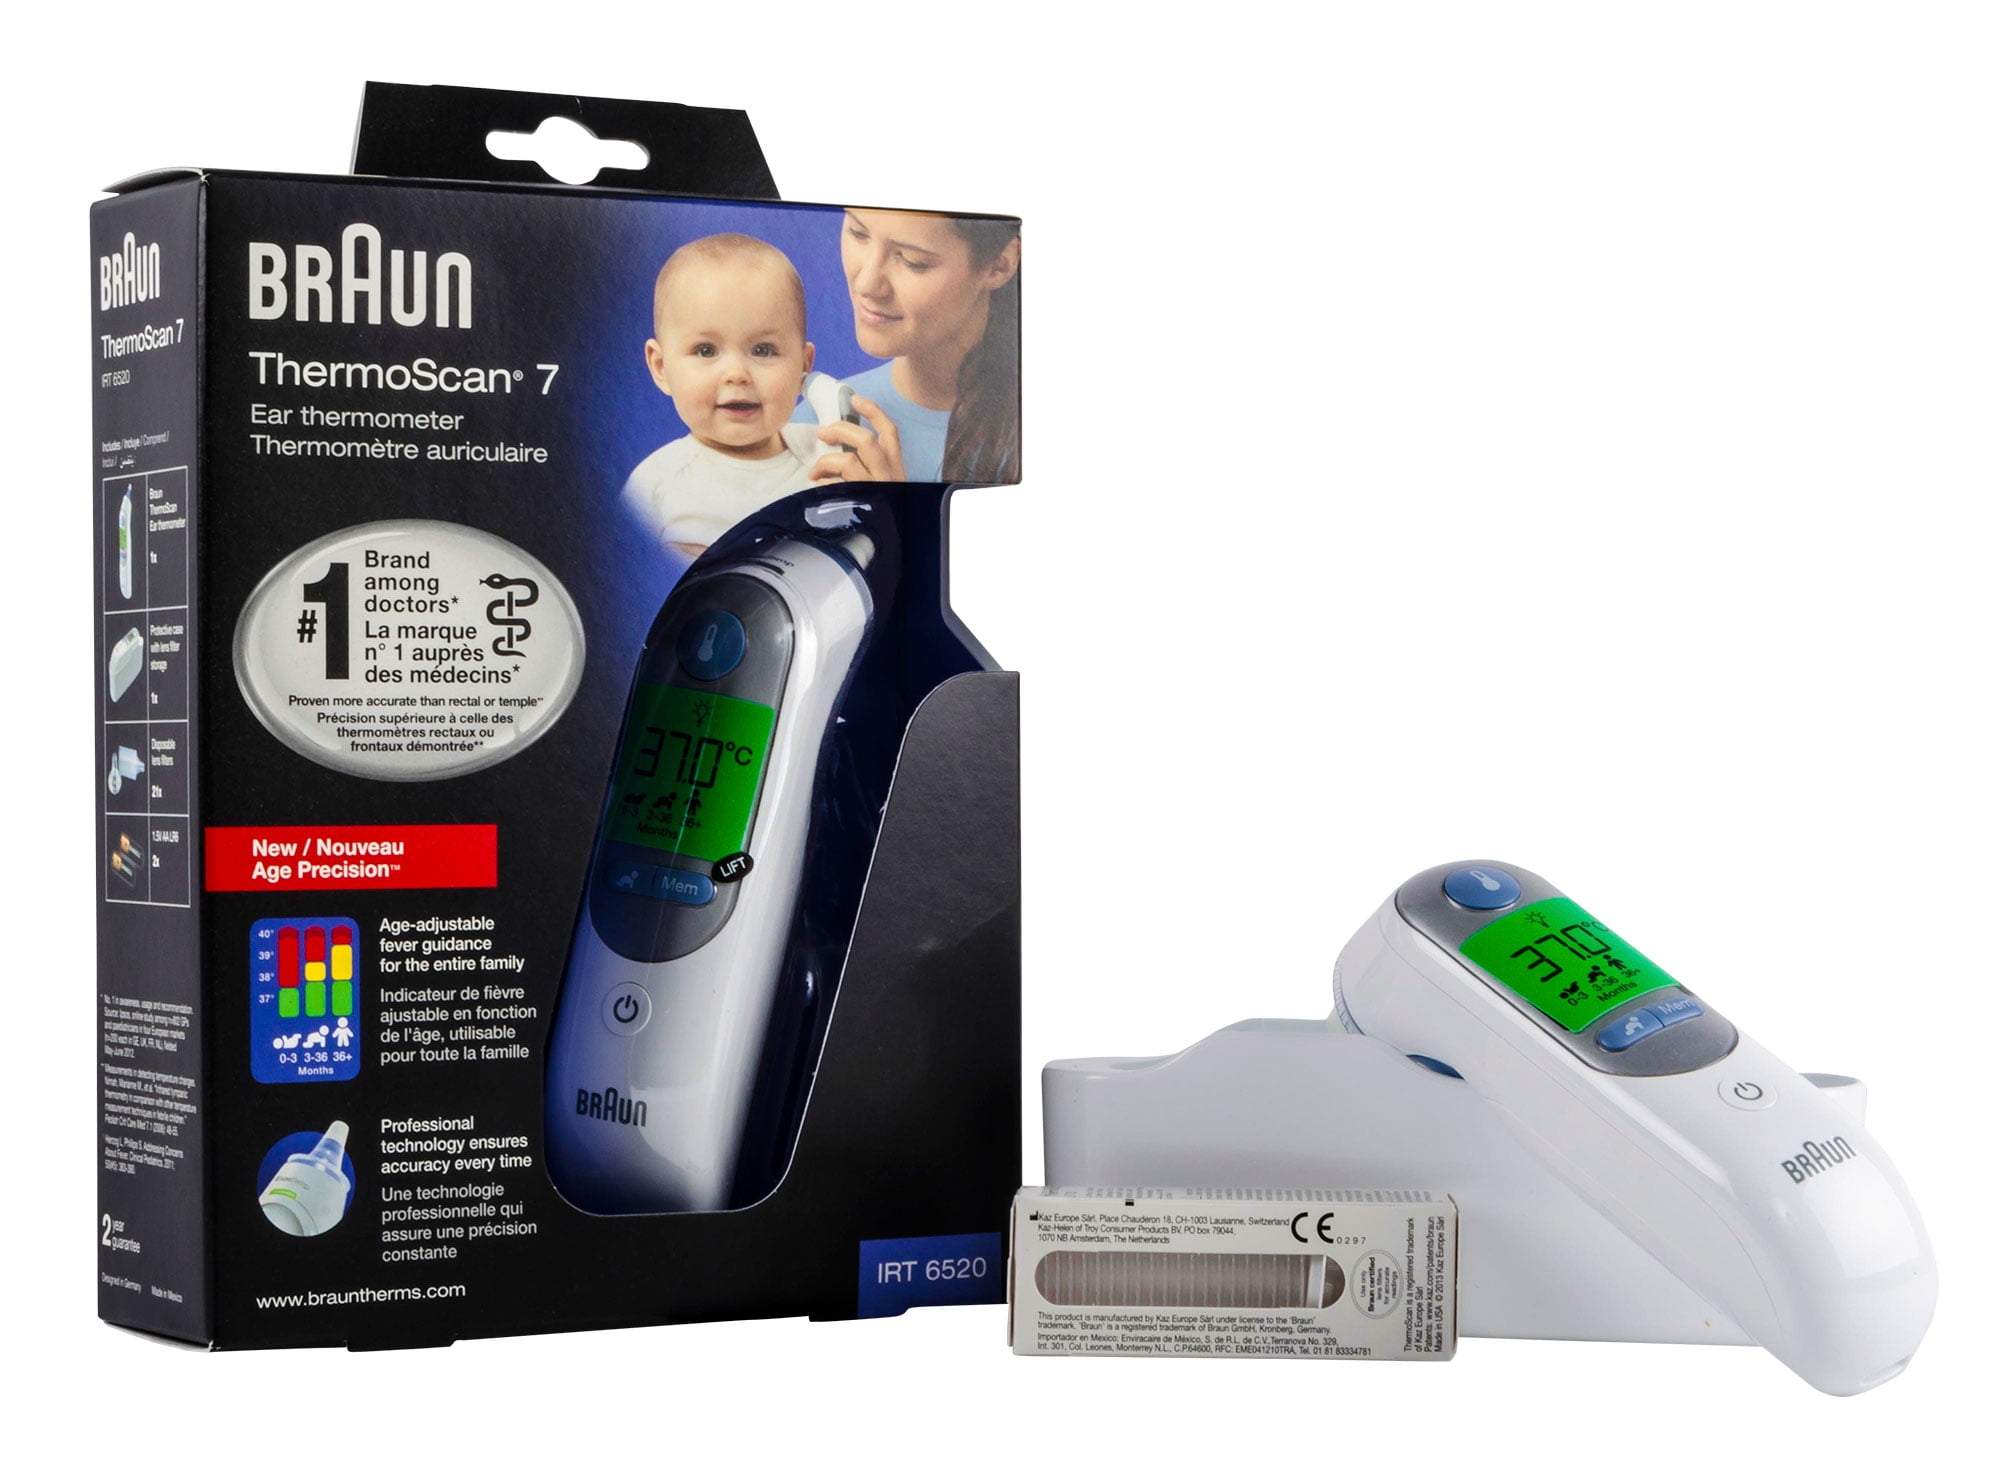 Braun Thermoscan 7 Ear Thermometer - New in Box 